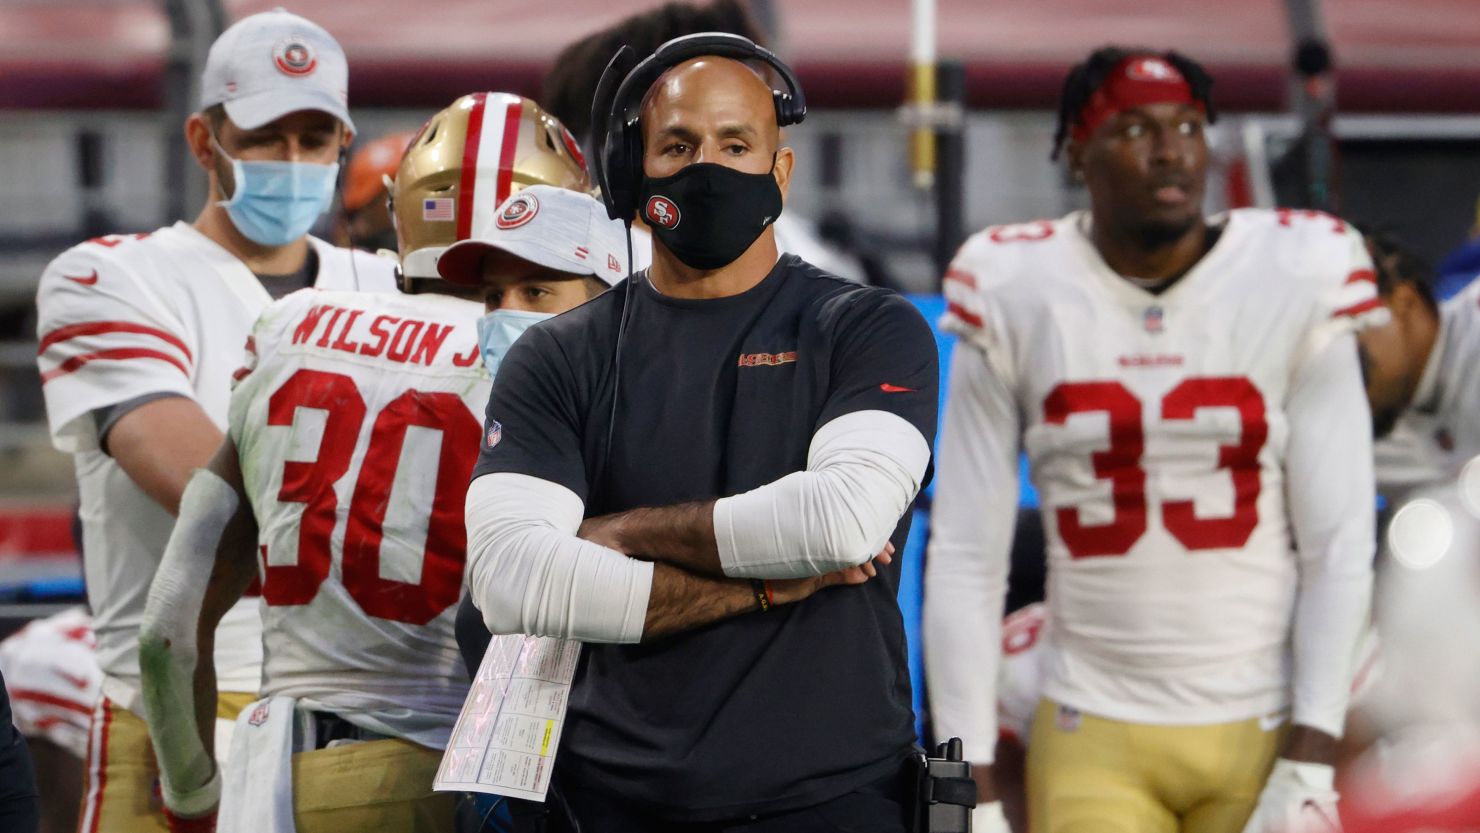 Robert Saleh, former defensive coordinator for the San Francisco 49ers, looks on during a game against the Arizona Cardinals at State Farm Stadium on December 26, 2020 in Glendale, Arizona. 